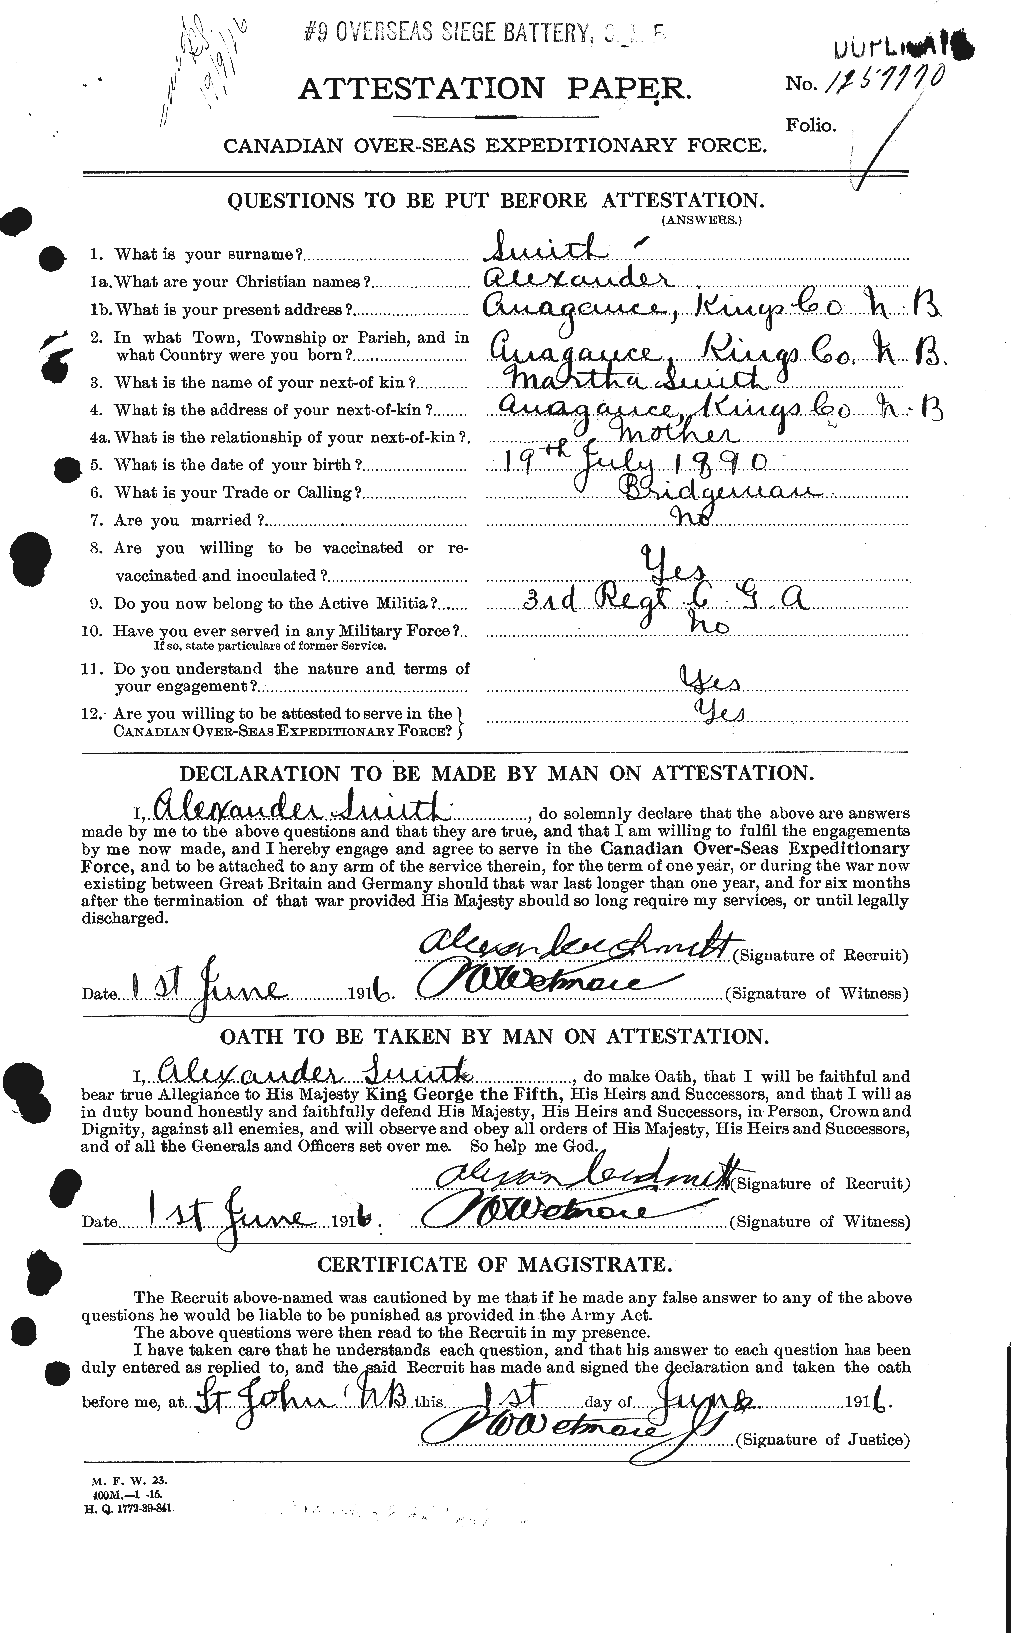 Personnel Records of the First World War - CEF 098321a